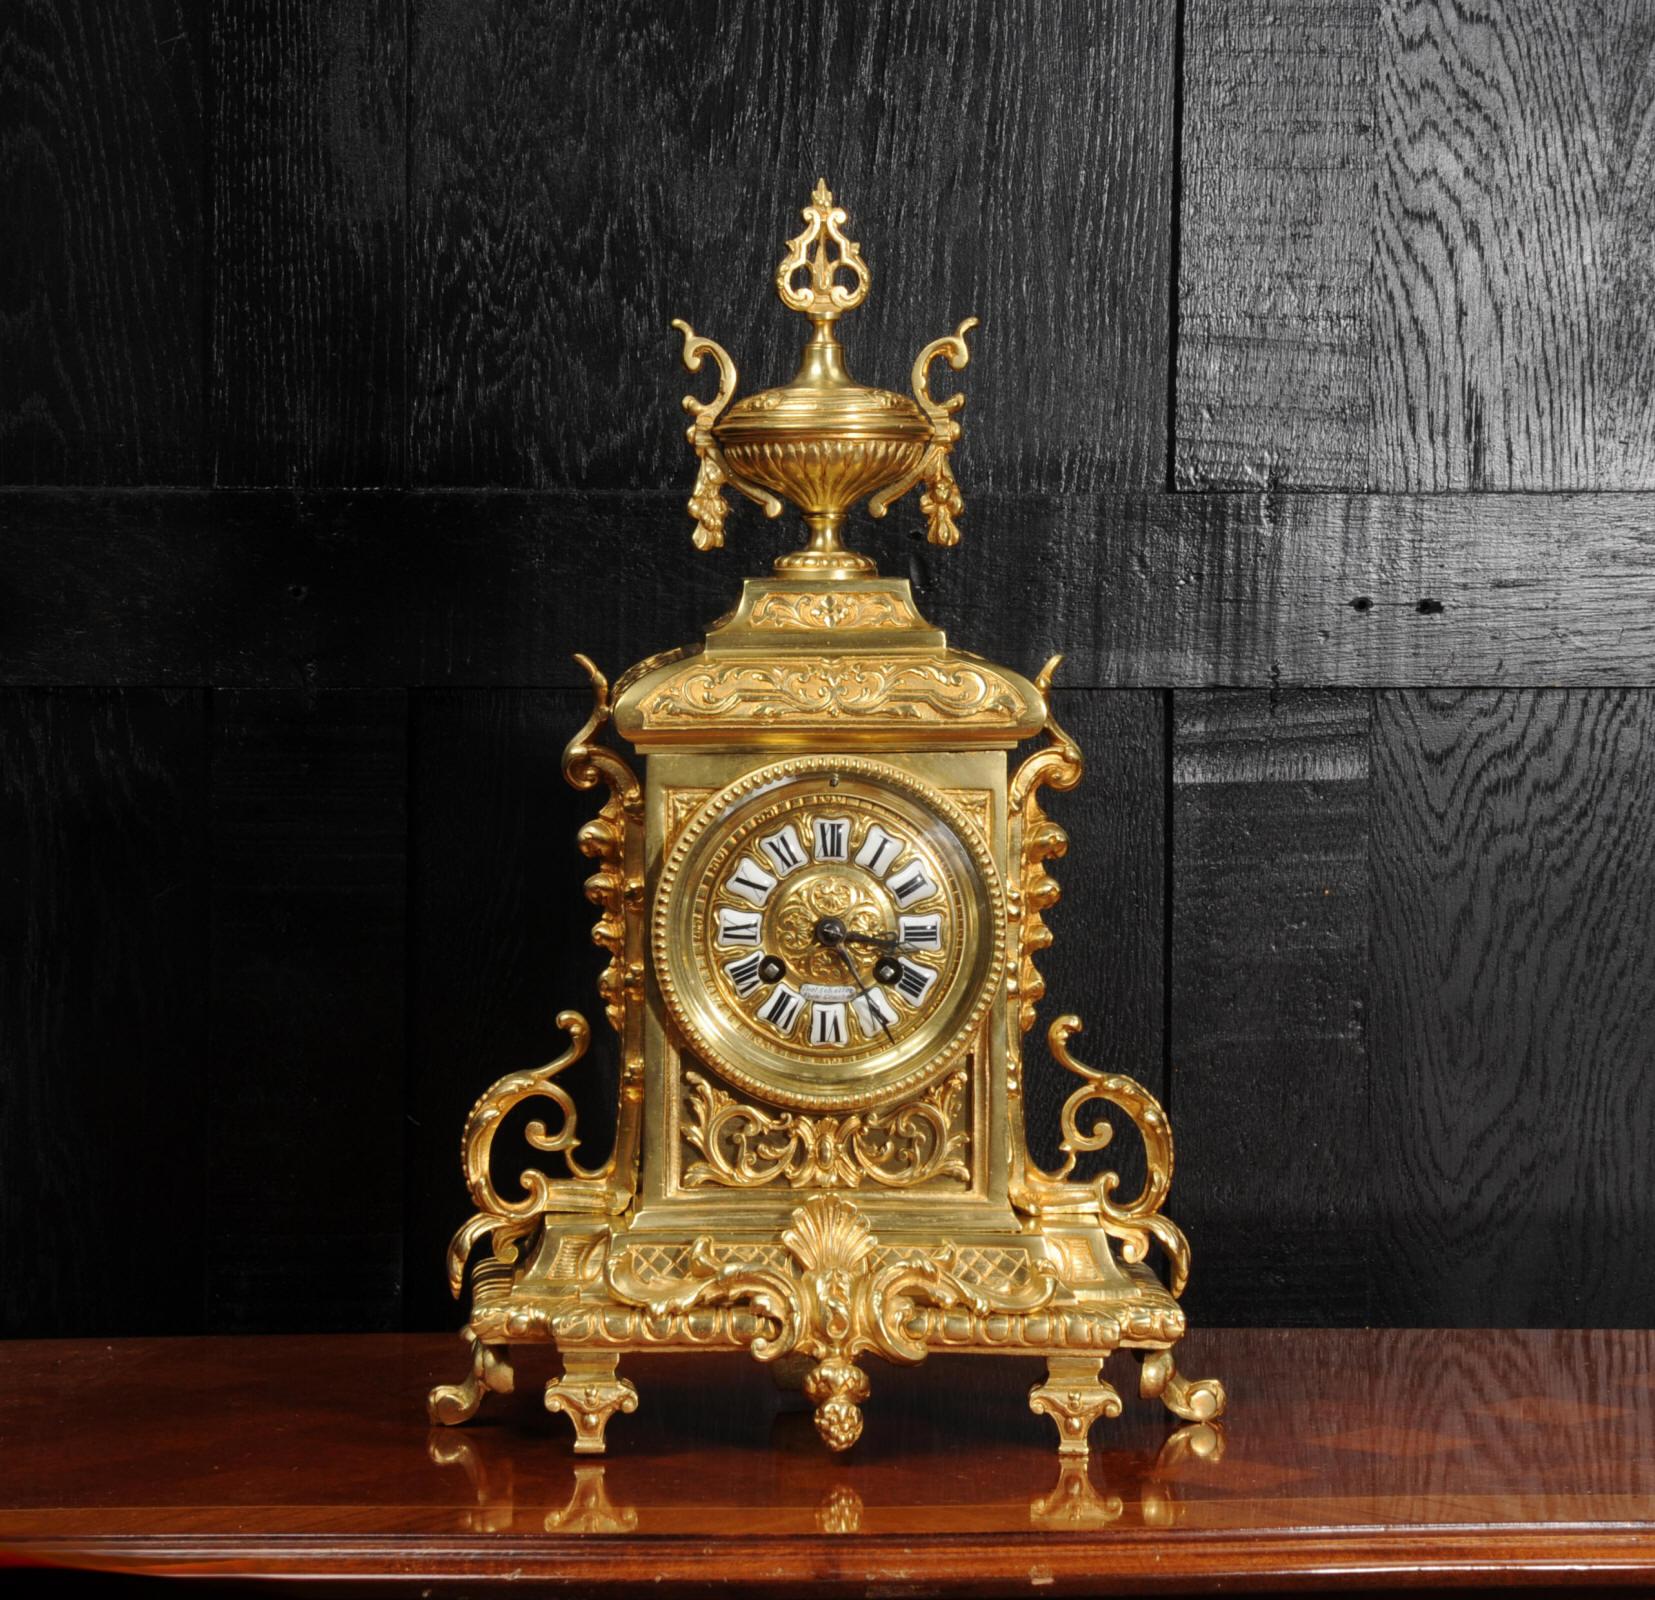 A beautiful original antique French clock, dating from circa 1870. It is in the Louis XVI style, elegantly decorated with acanthus and a large urn to the top. To the front is a panel with blind fret work of acanthus. The rear door is glazed to allow